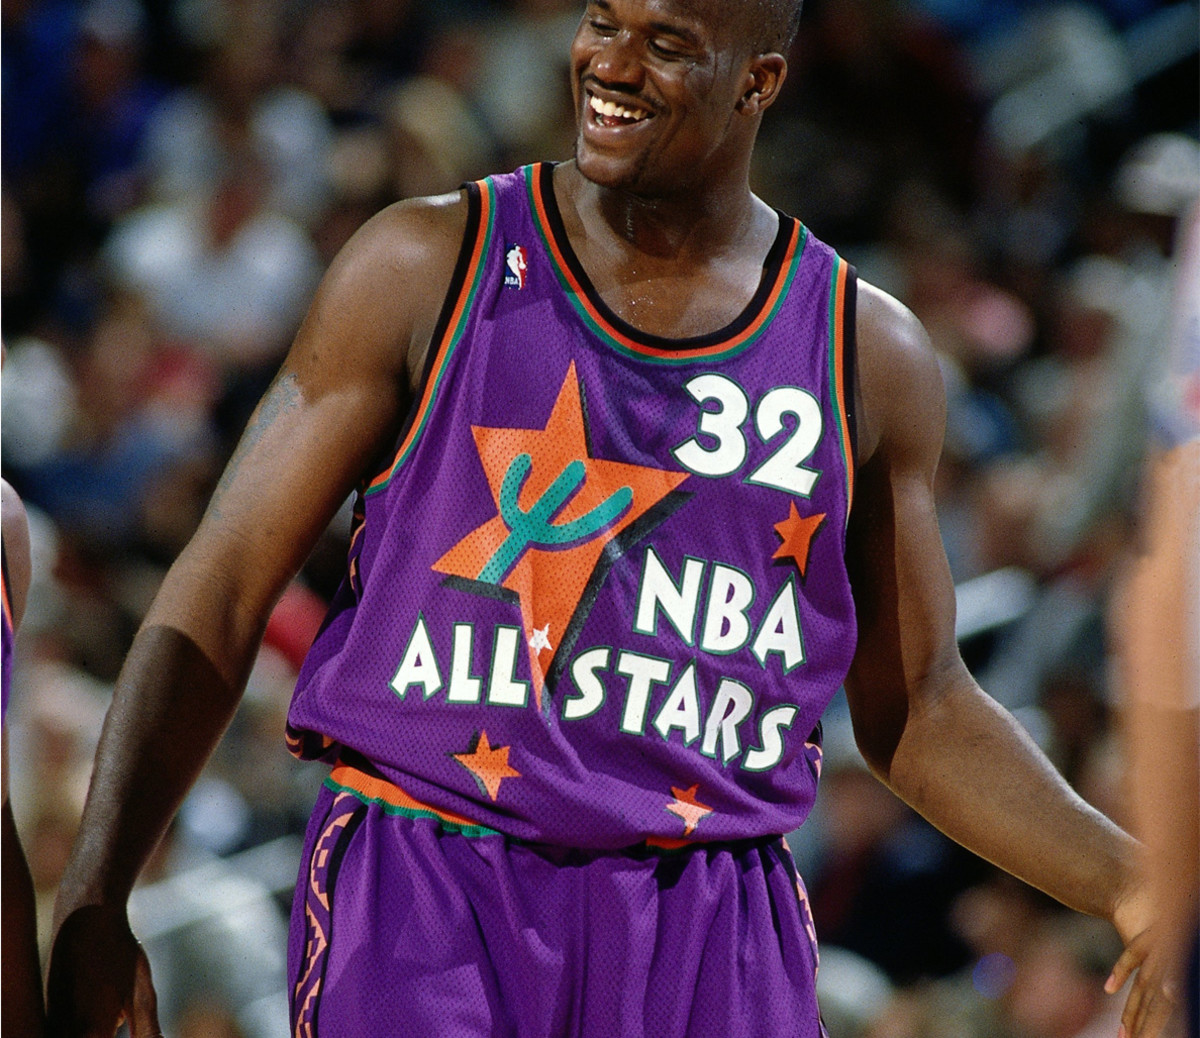 The Best and Worst Uniforms in Miami Heat History